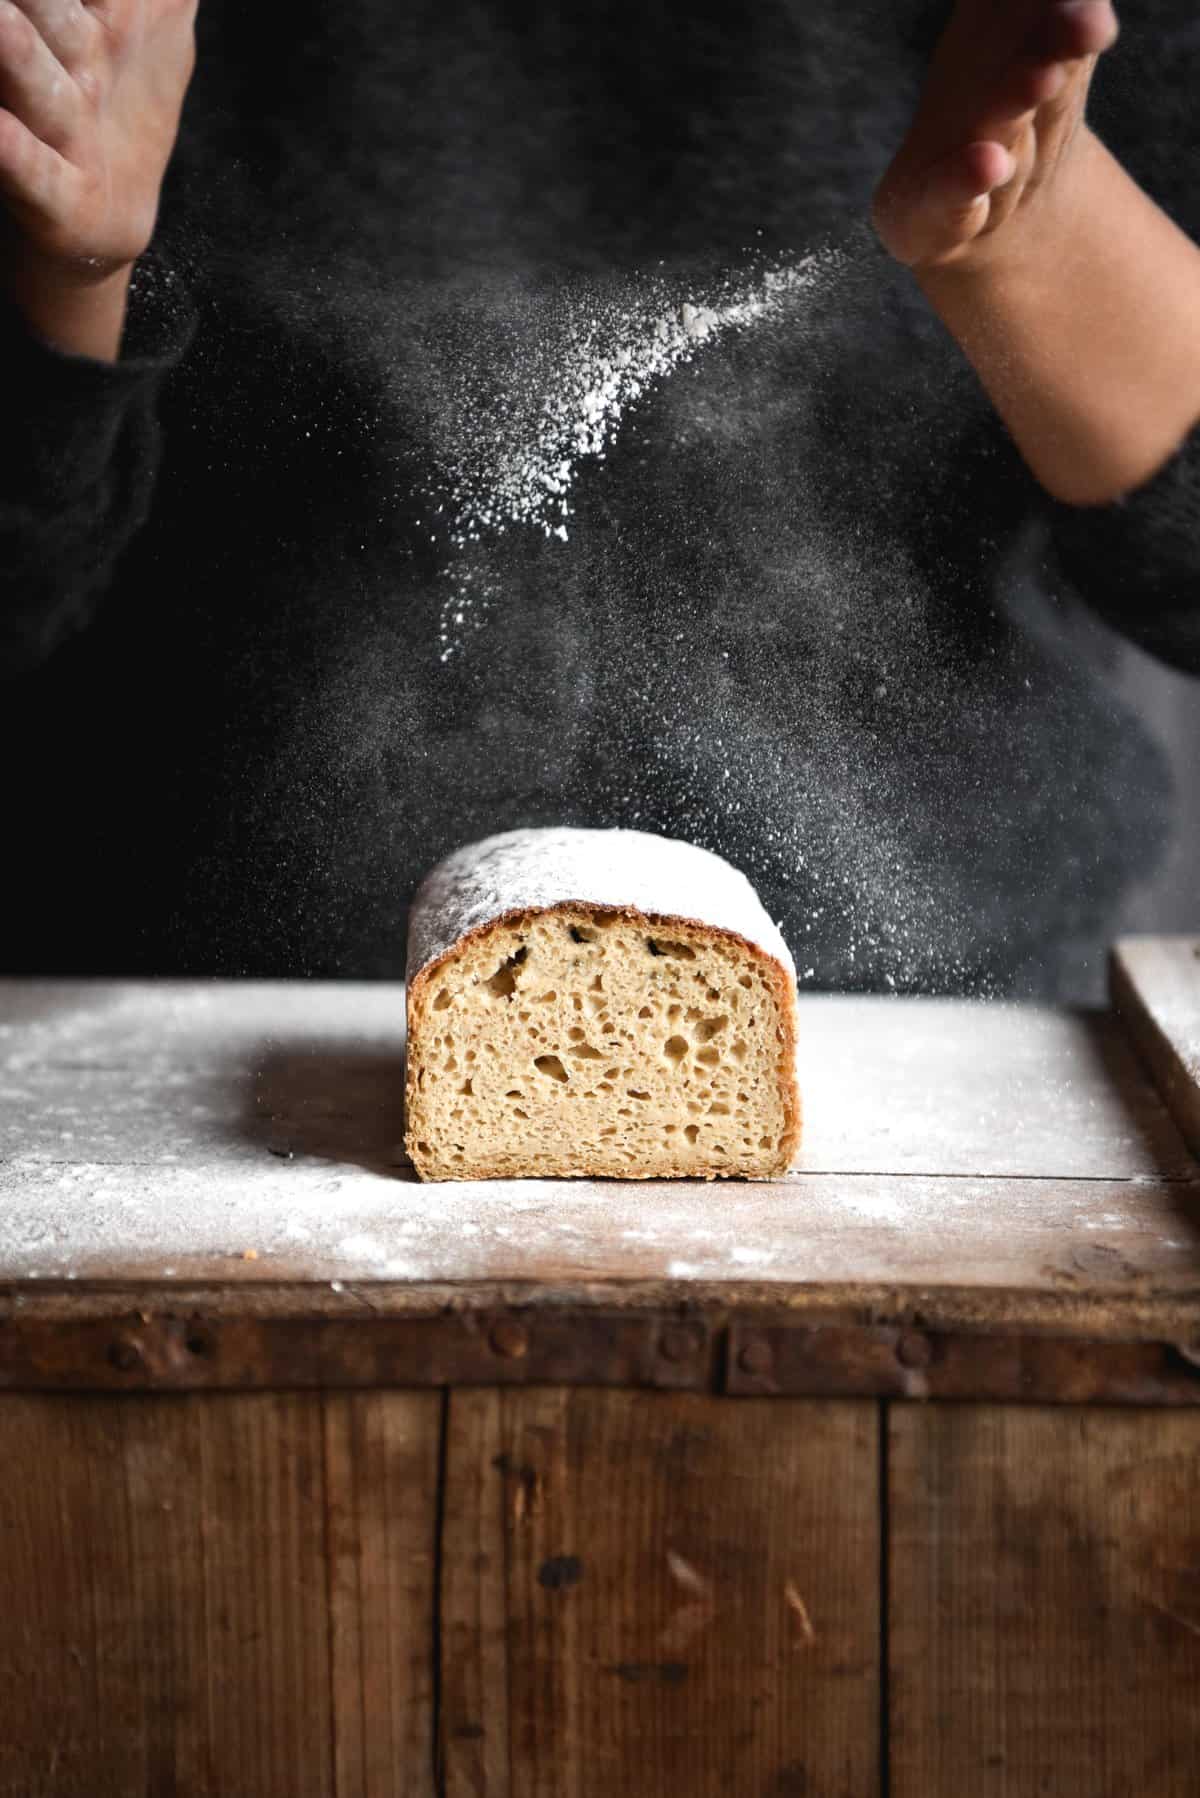 A side on view of a loaf of gluten free white bread on a wooden table. A person in a dark grey jumper stands behind the loaf and sprinkles flour down onto the bread.